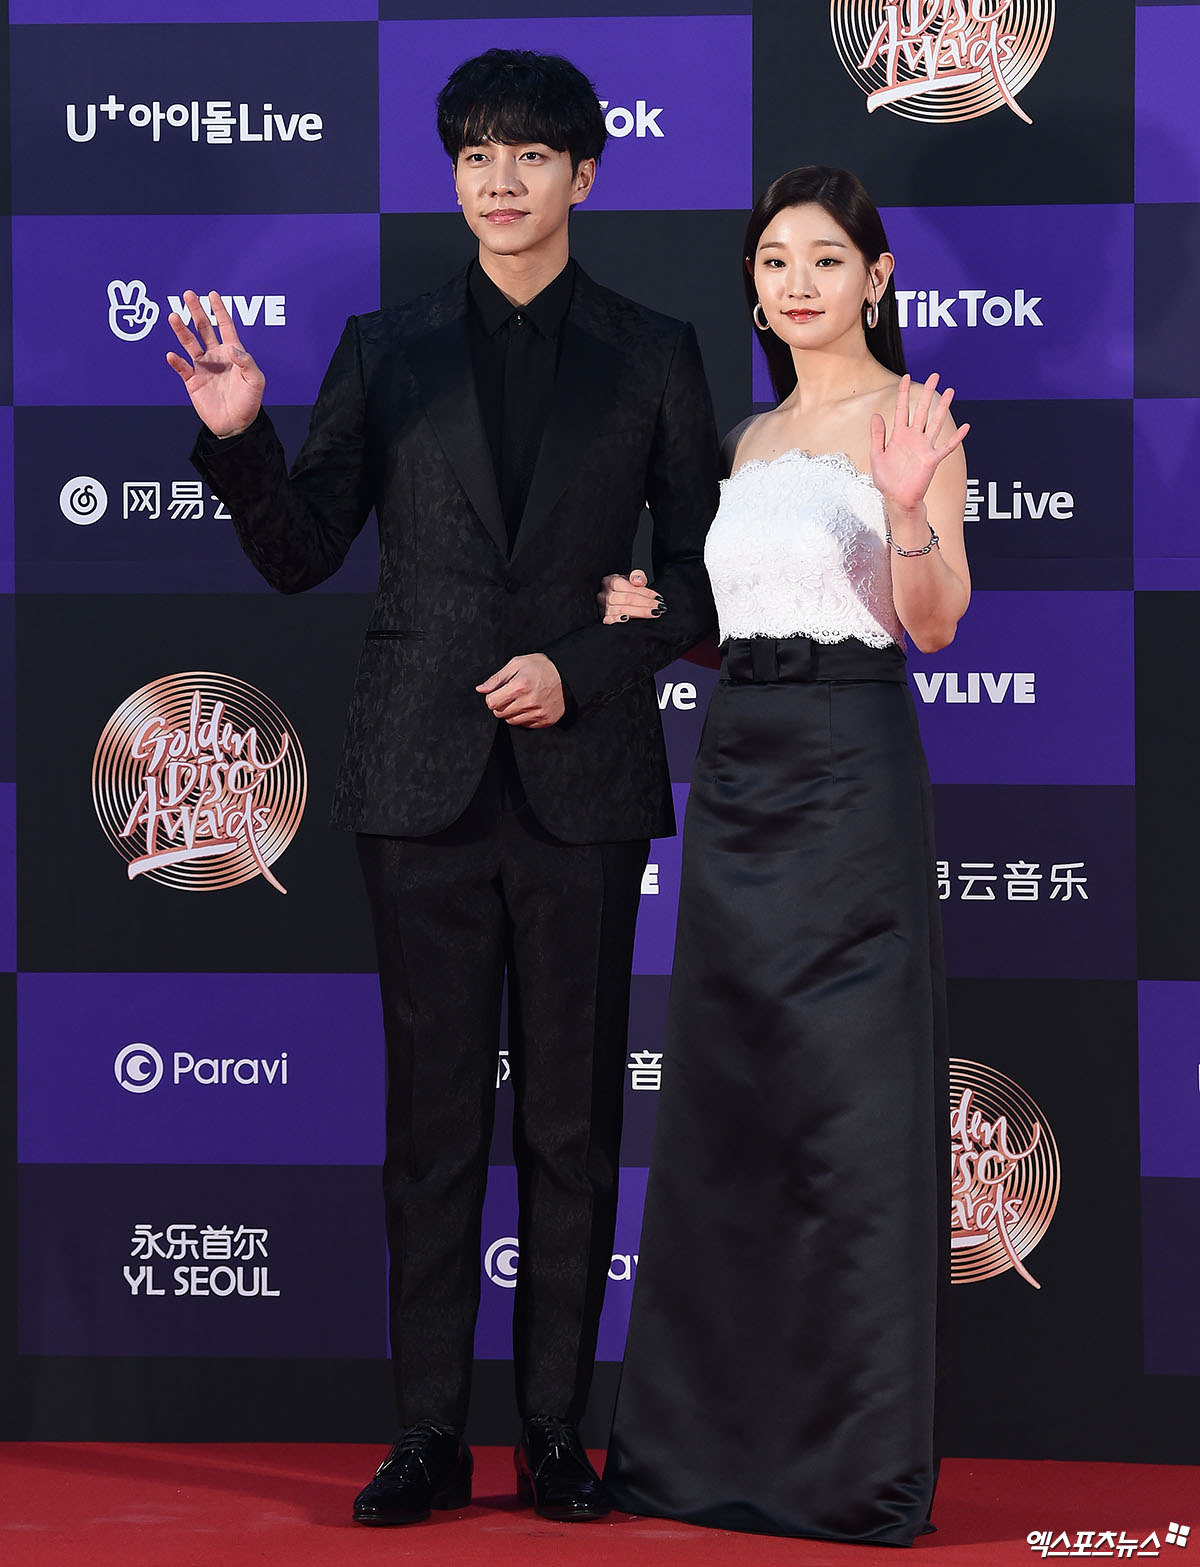 Actor Lee Seung-gi and Park So-dam attended the red carpet event ahead of the awards ceremony of the 34th Golden Disk Awards with Tiktok at the Gocheok Sky Dome in Seoul Guro District on the afternoon of the 5th.